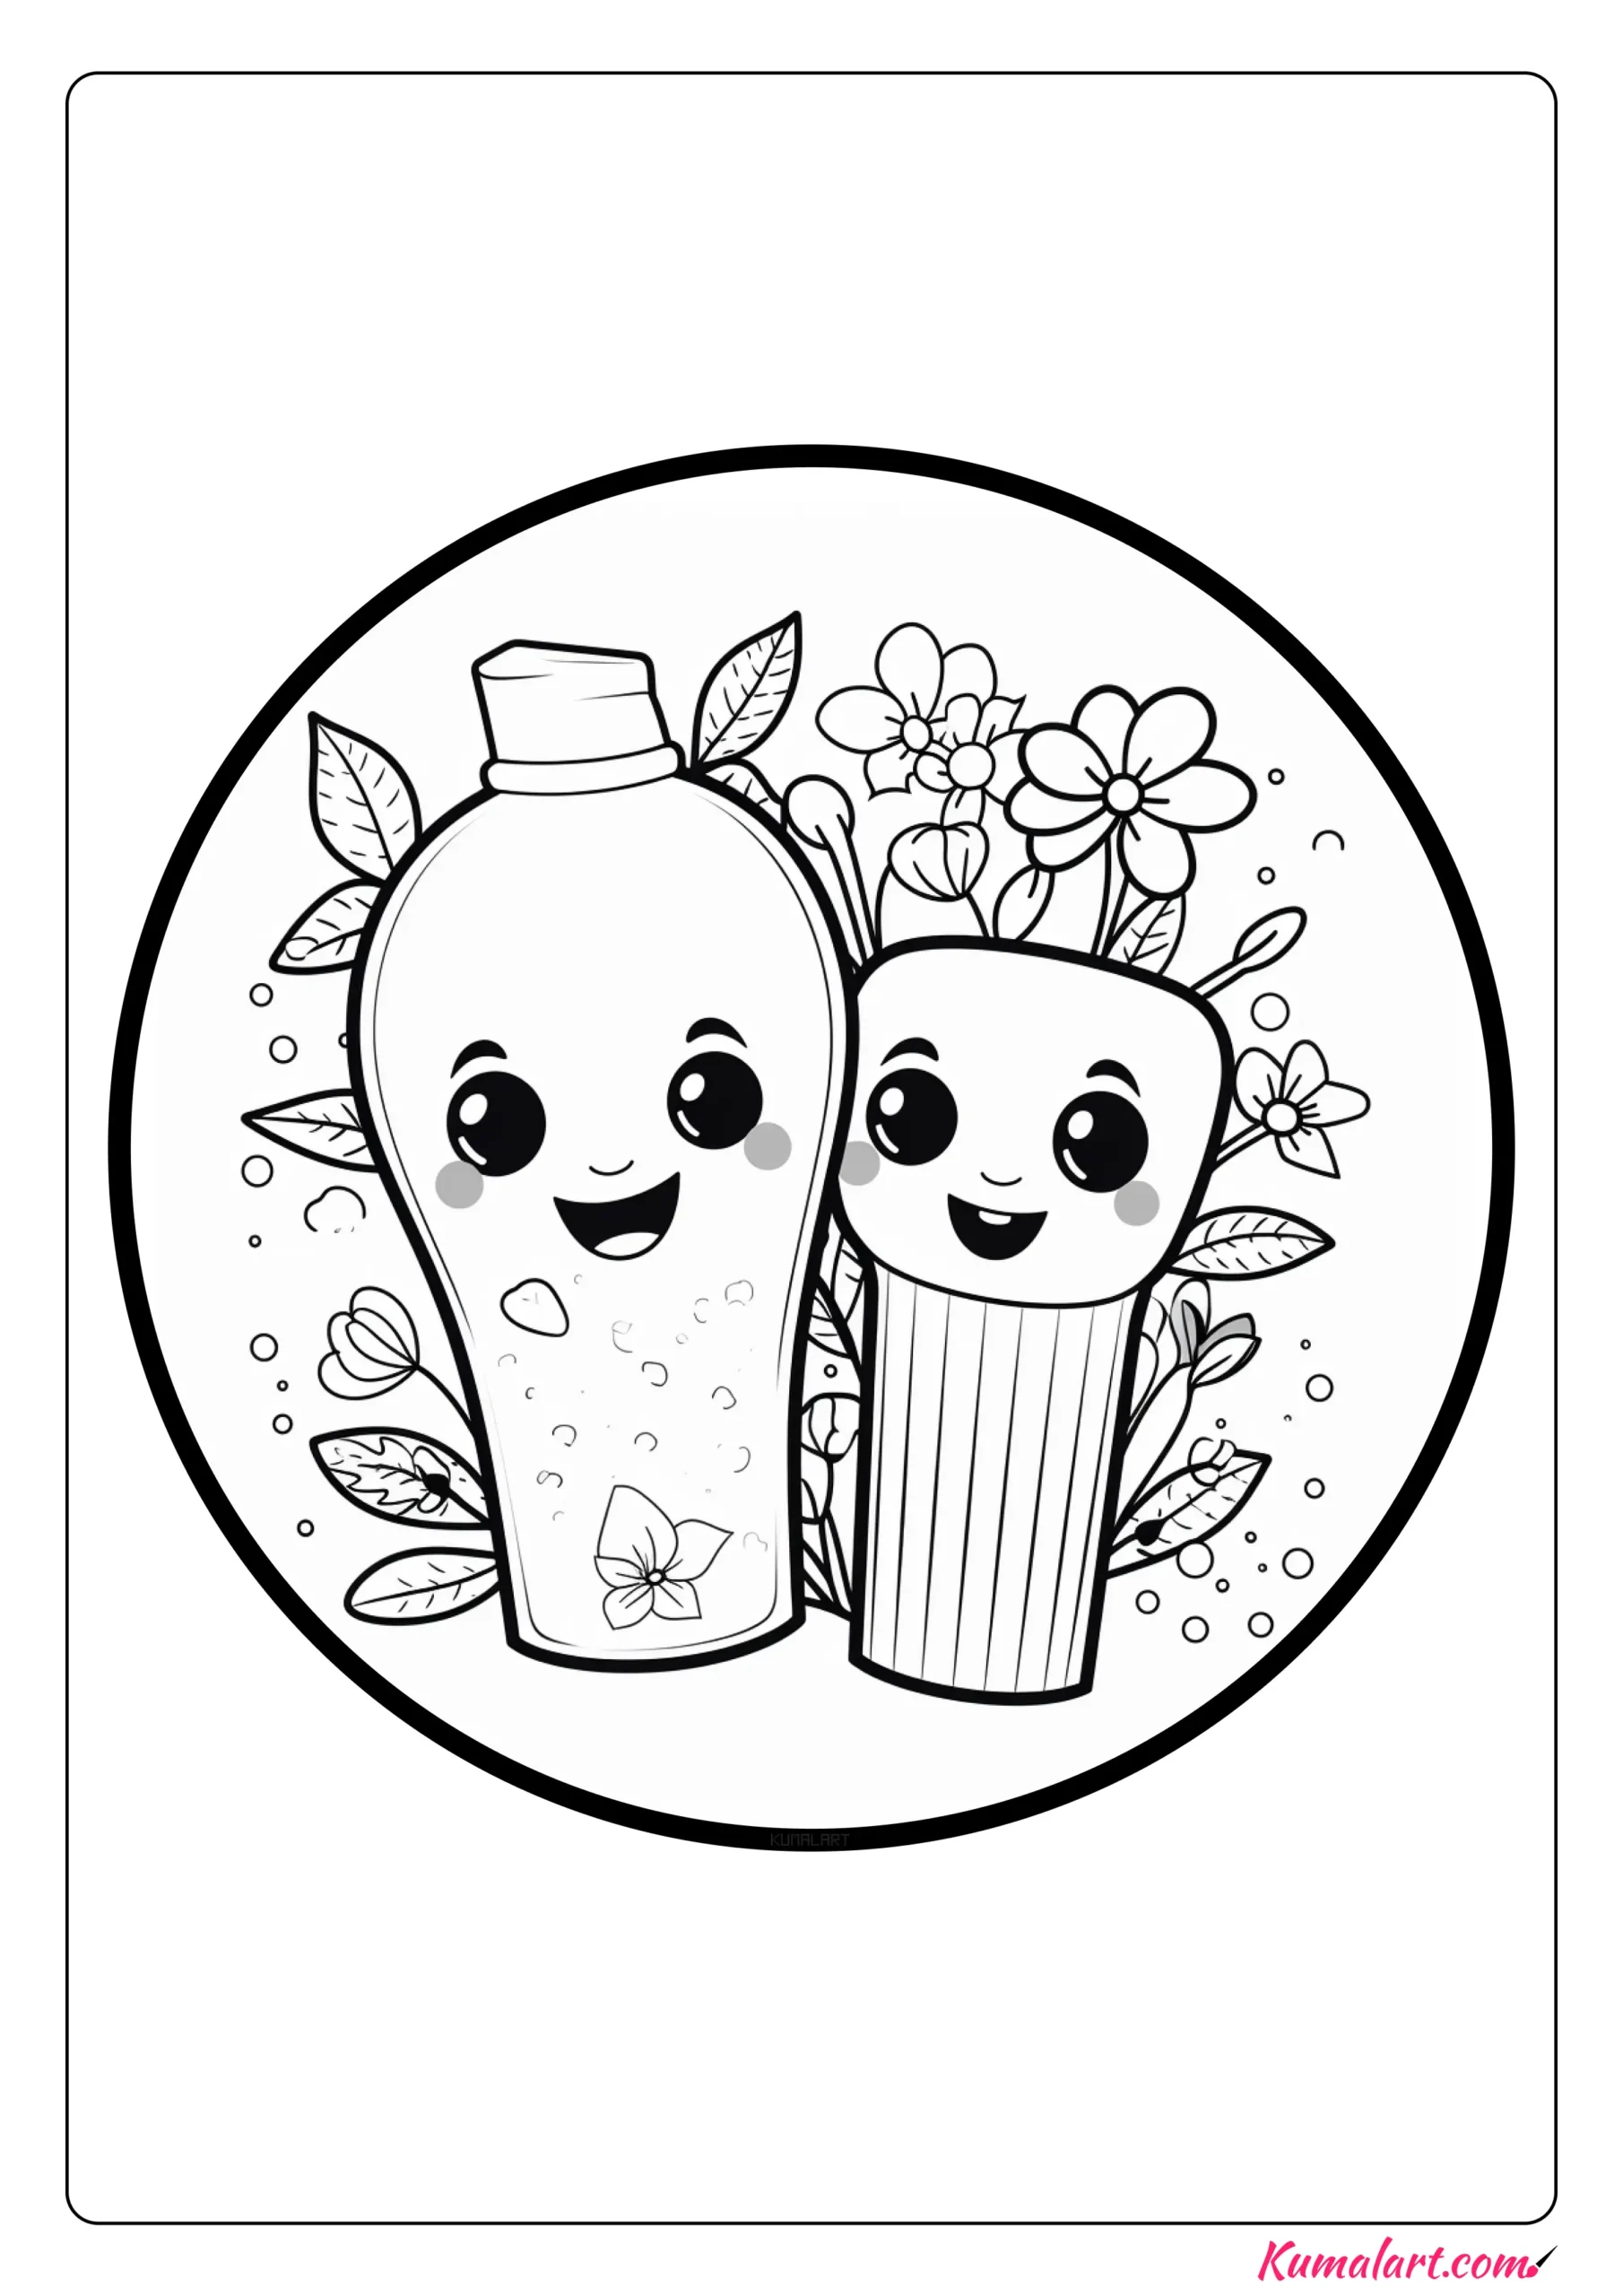 Lovely Tooth Brushing Coloring Page